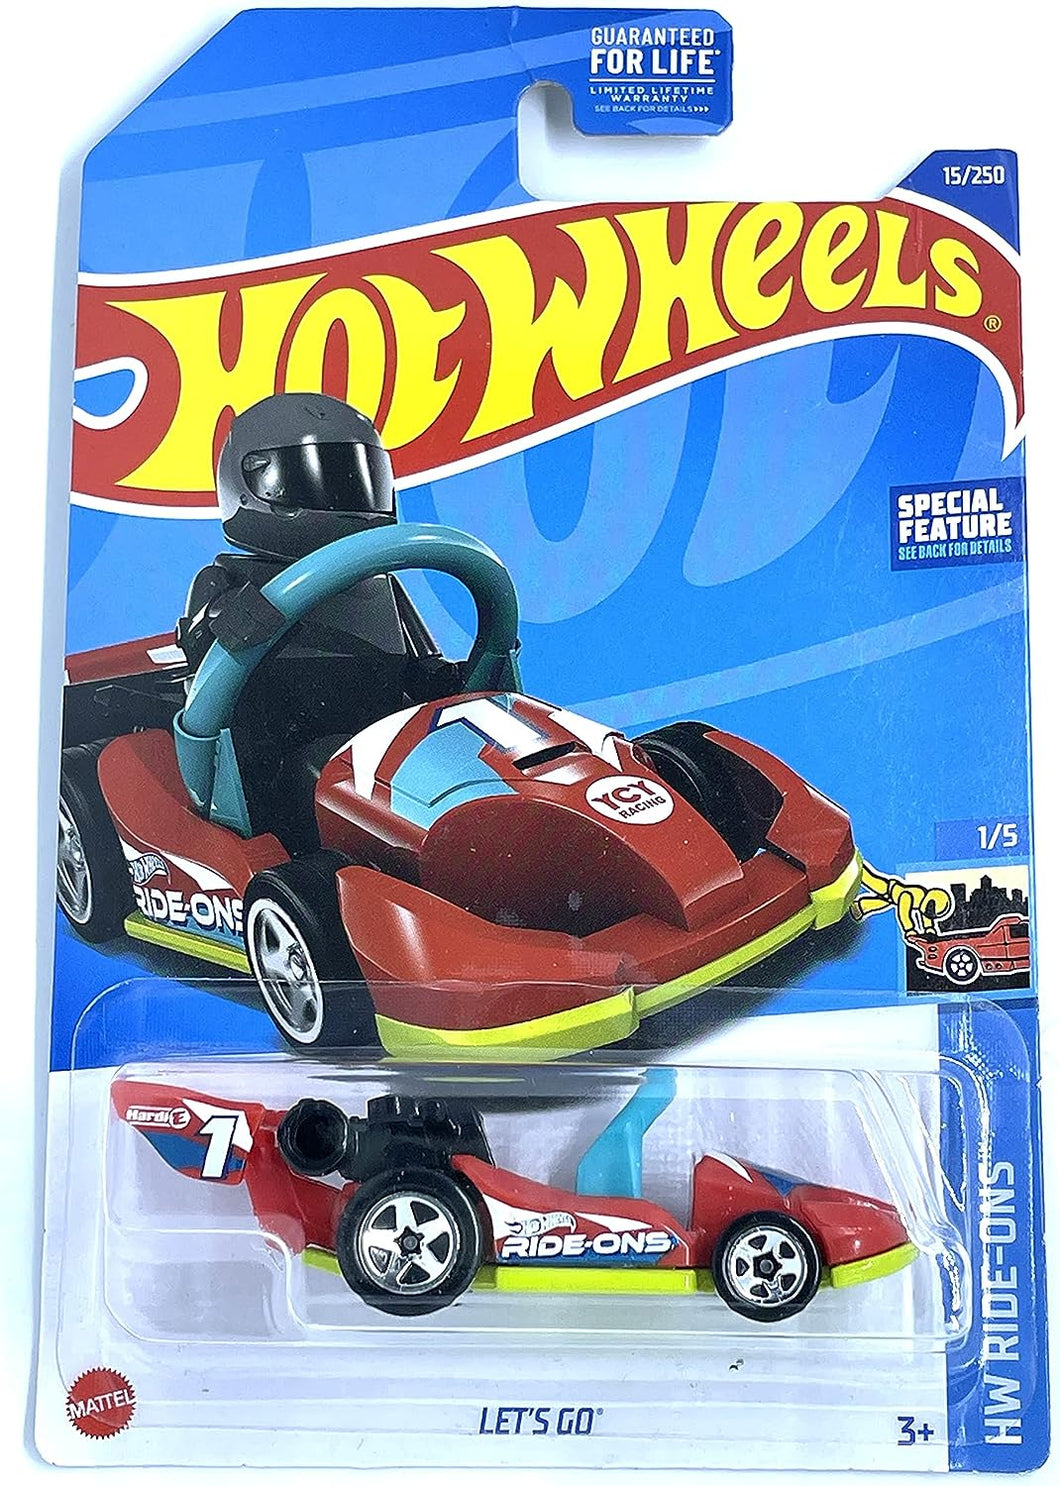 Hot Wheels Let's GO HW Ride-Ons 1/5 15/250 - Assorted